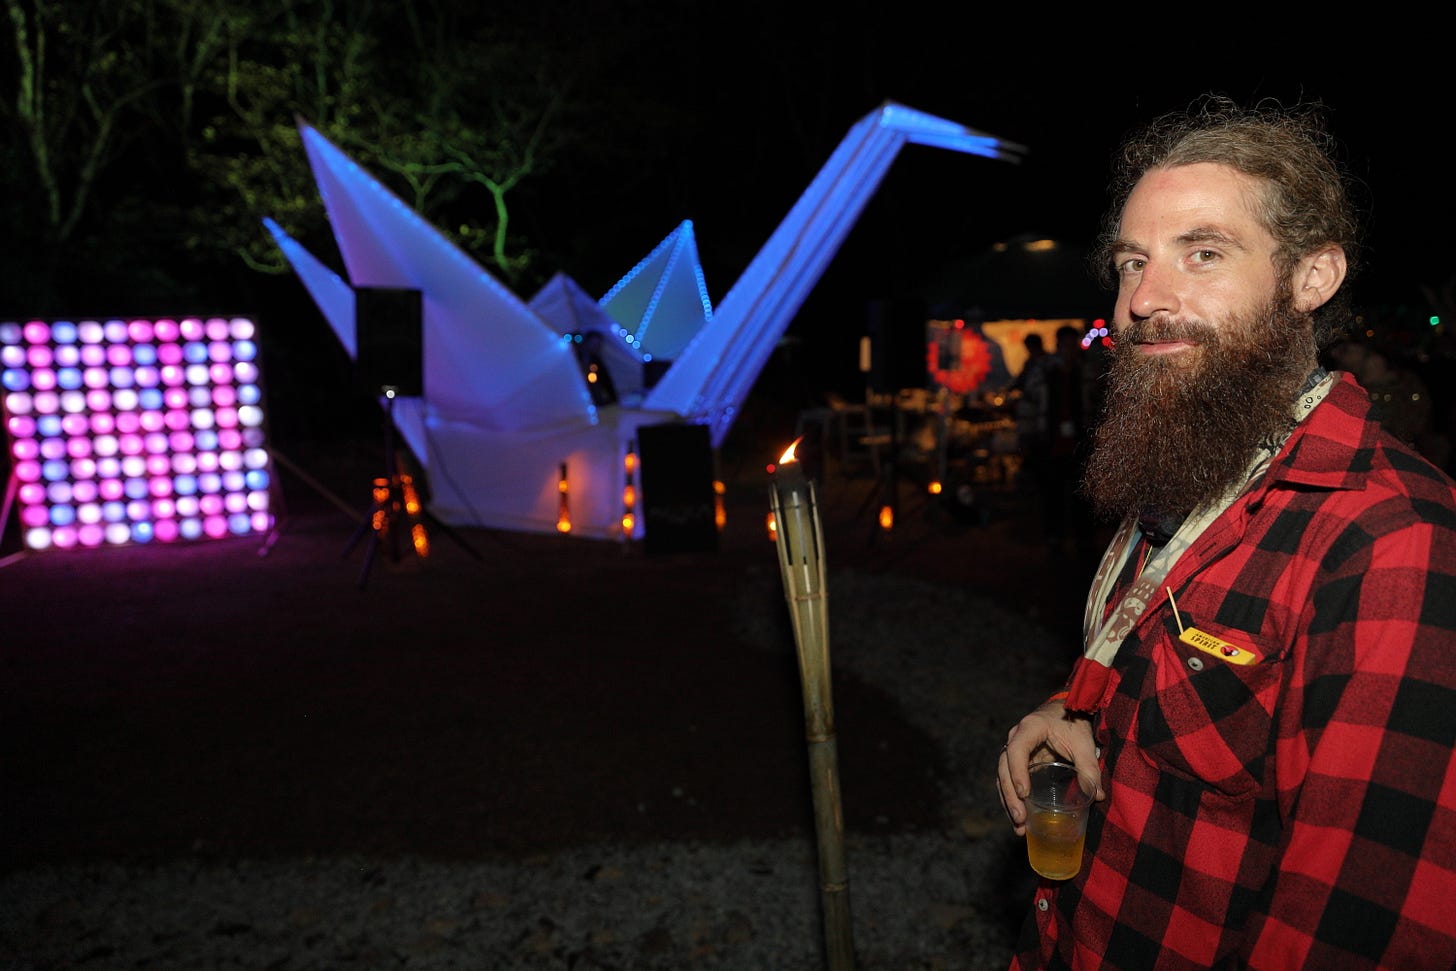 Matthew Ketchum in a red and black plaid long sleeve shirt with a drink smiling at the camera at Burning Japan 2023. Three headed neon crane in the background, night.